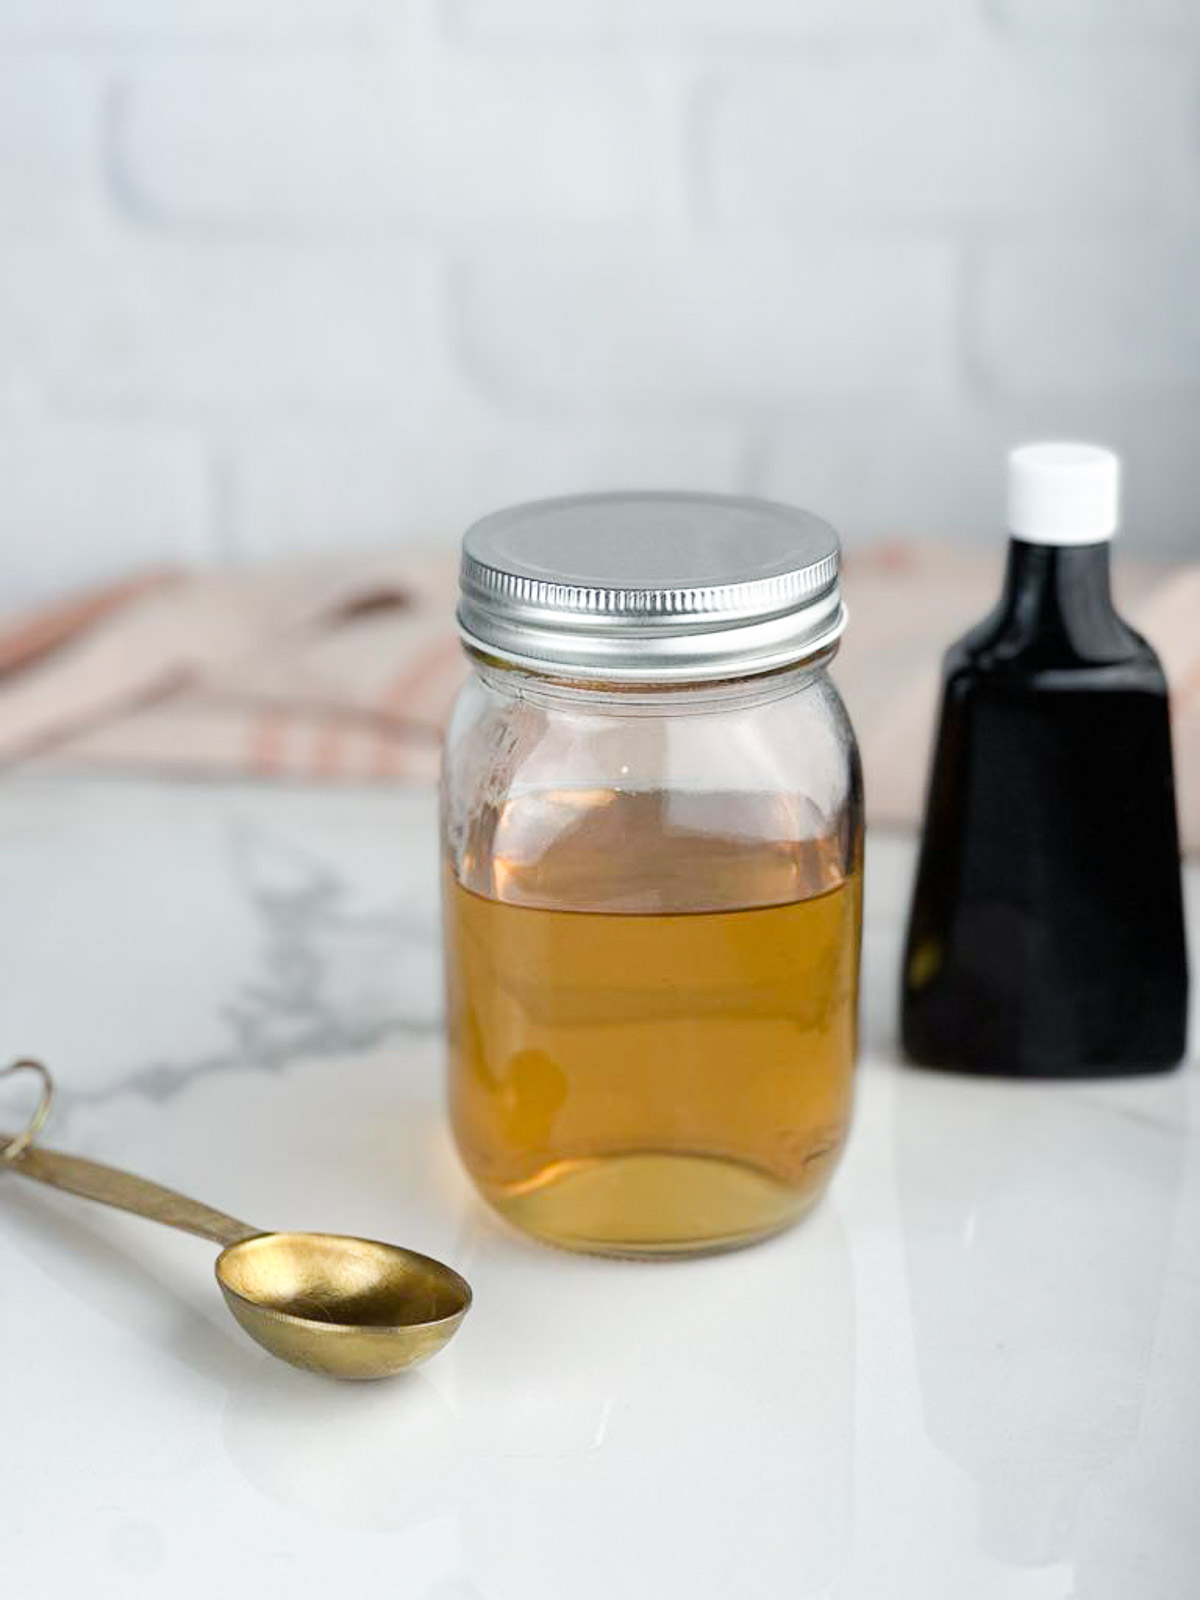 A jar of vanilla simple syrup ready to be used in baked goods or drinks